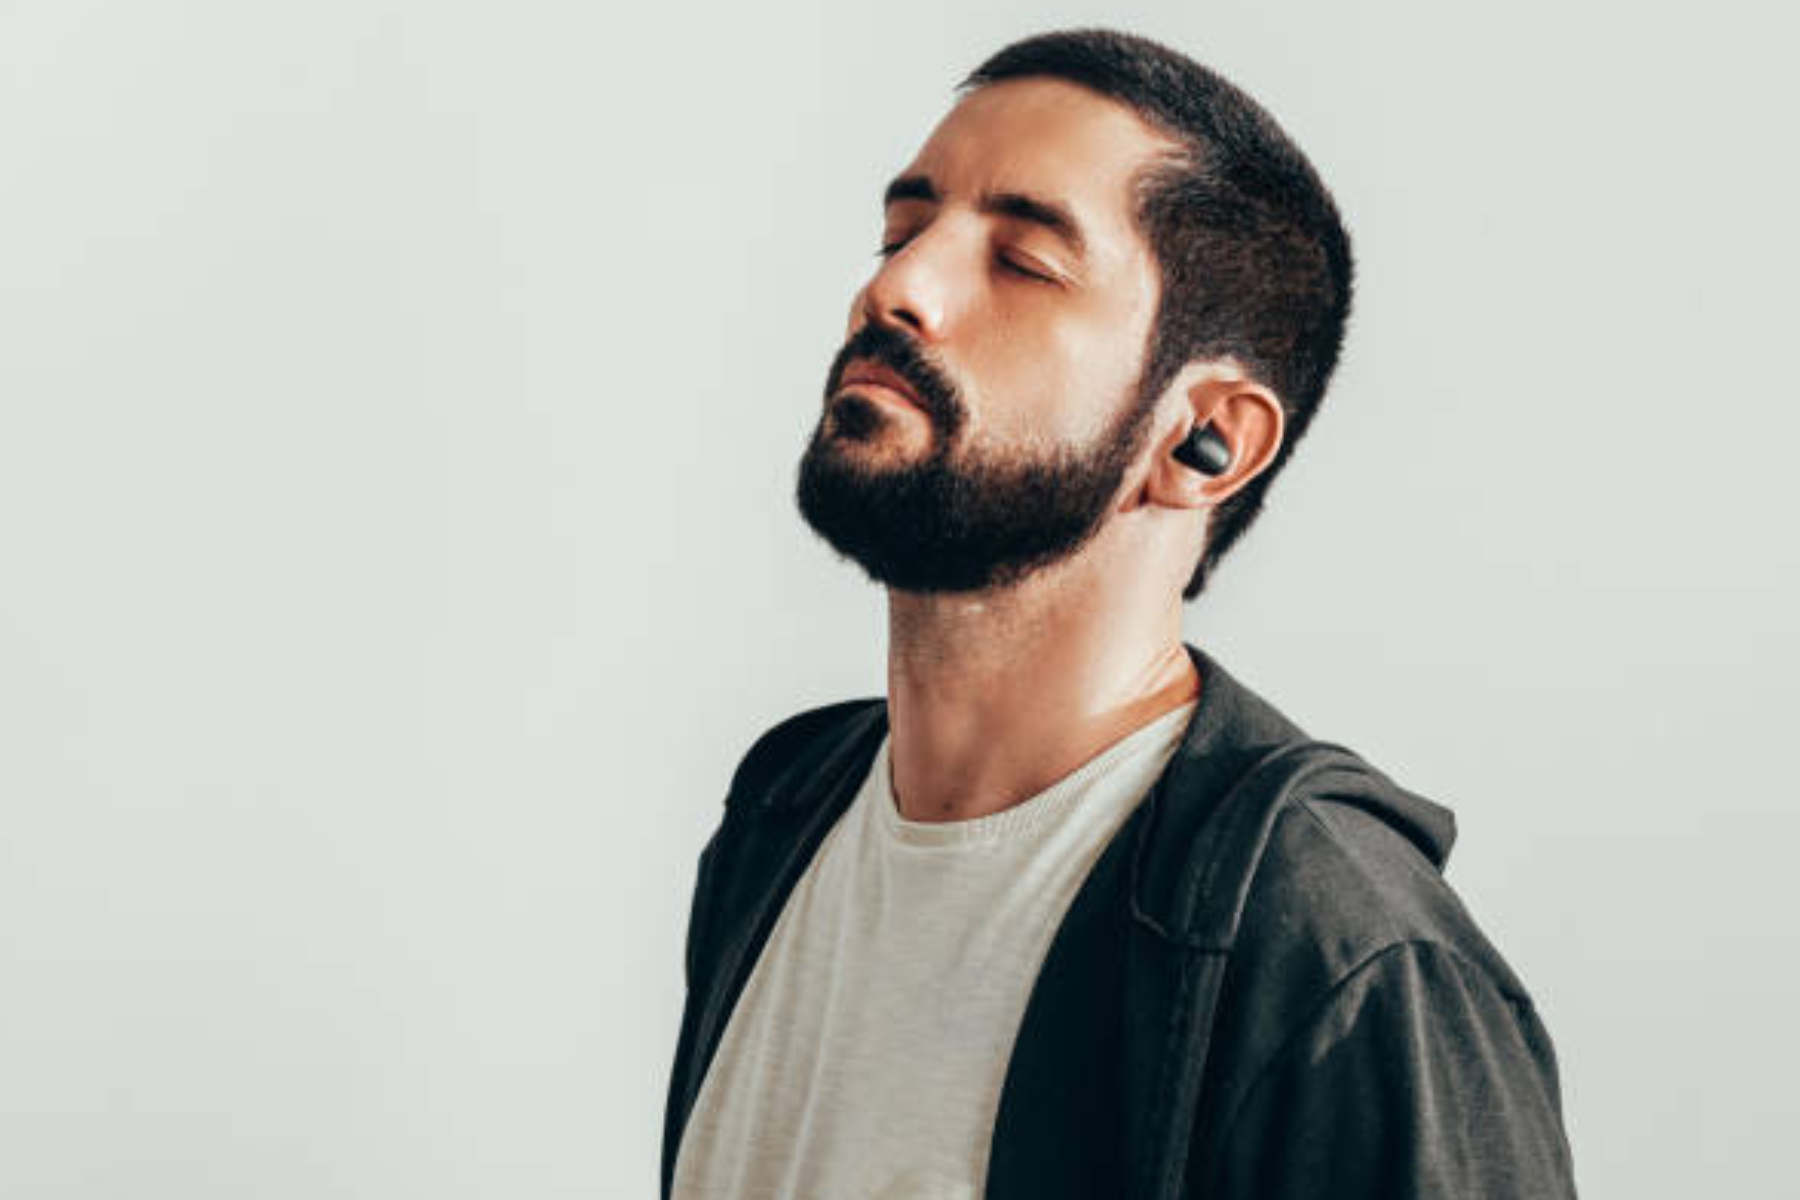 A man wearing black earbuds, closing his eyes while listening to music